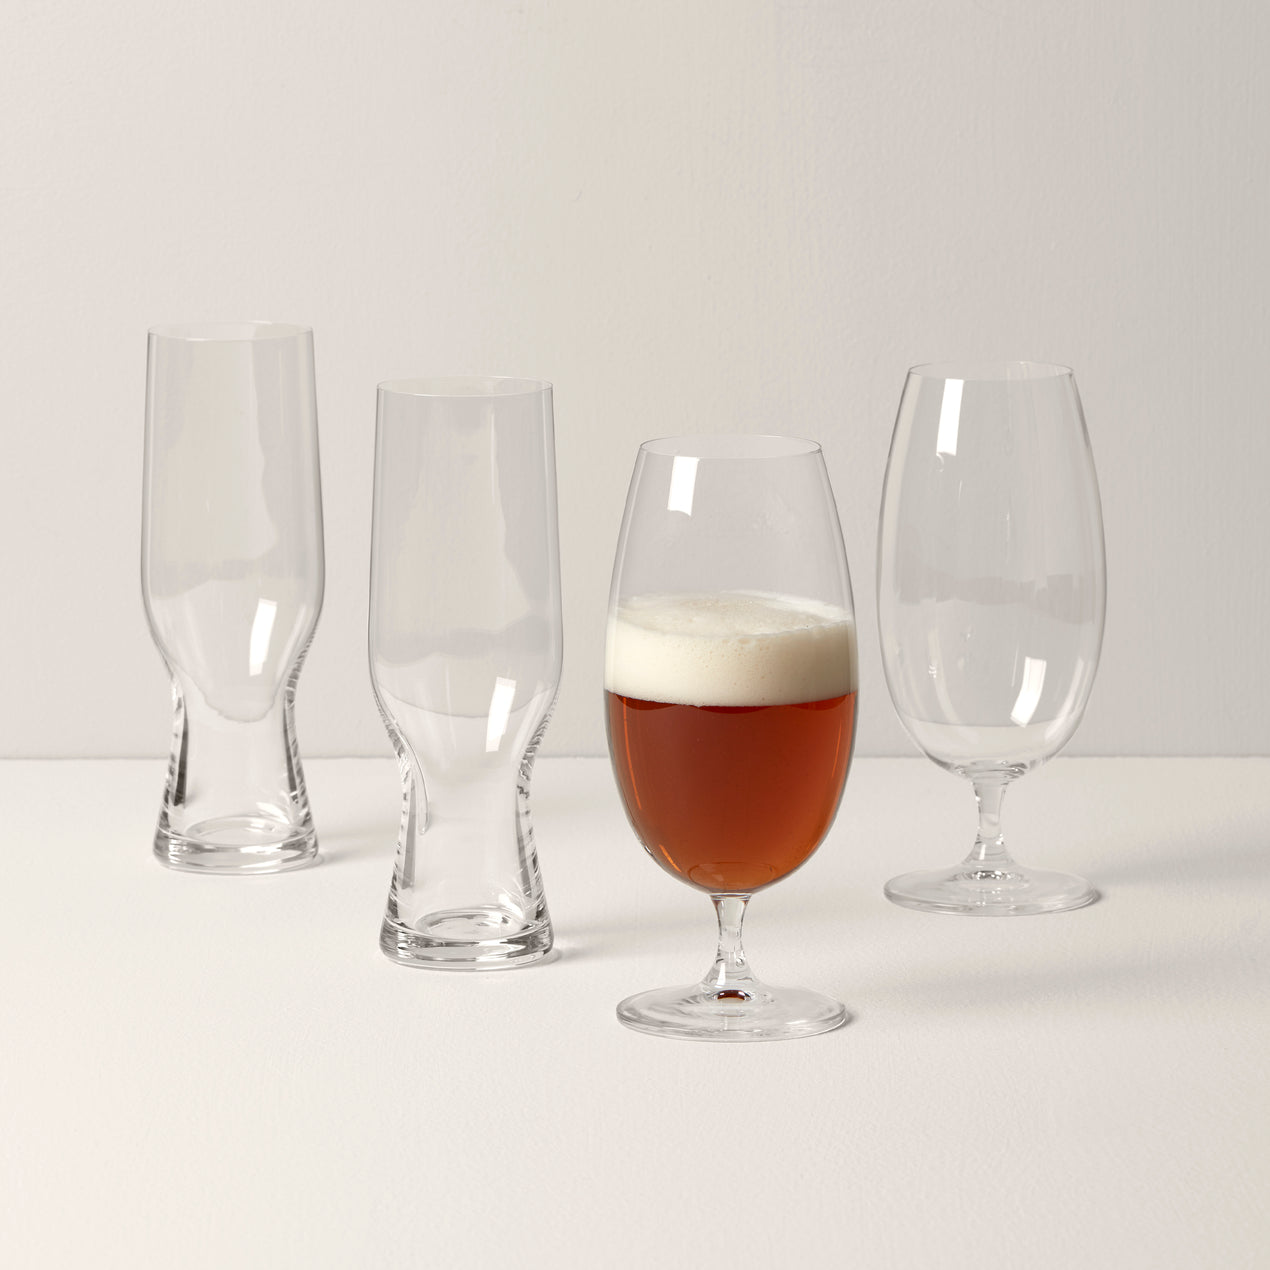 Classic Coupe or Cocktail Glass by Riedel (Set of Two)